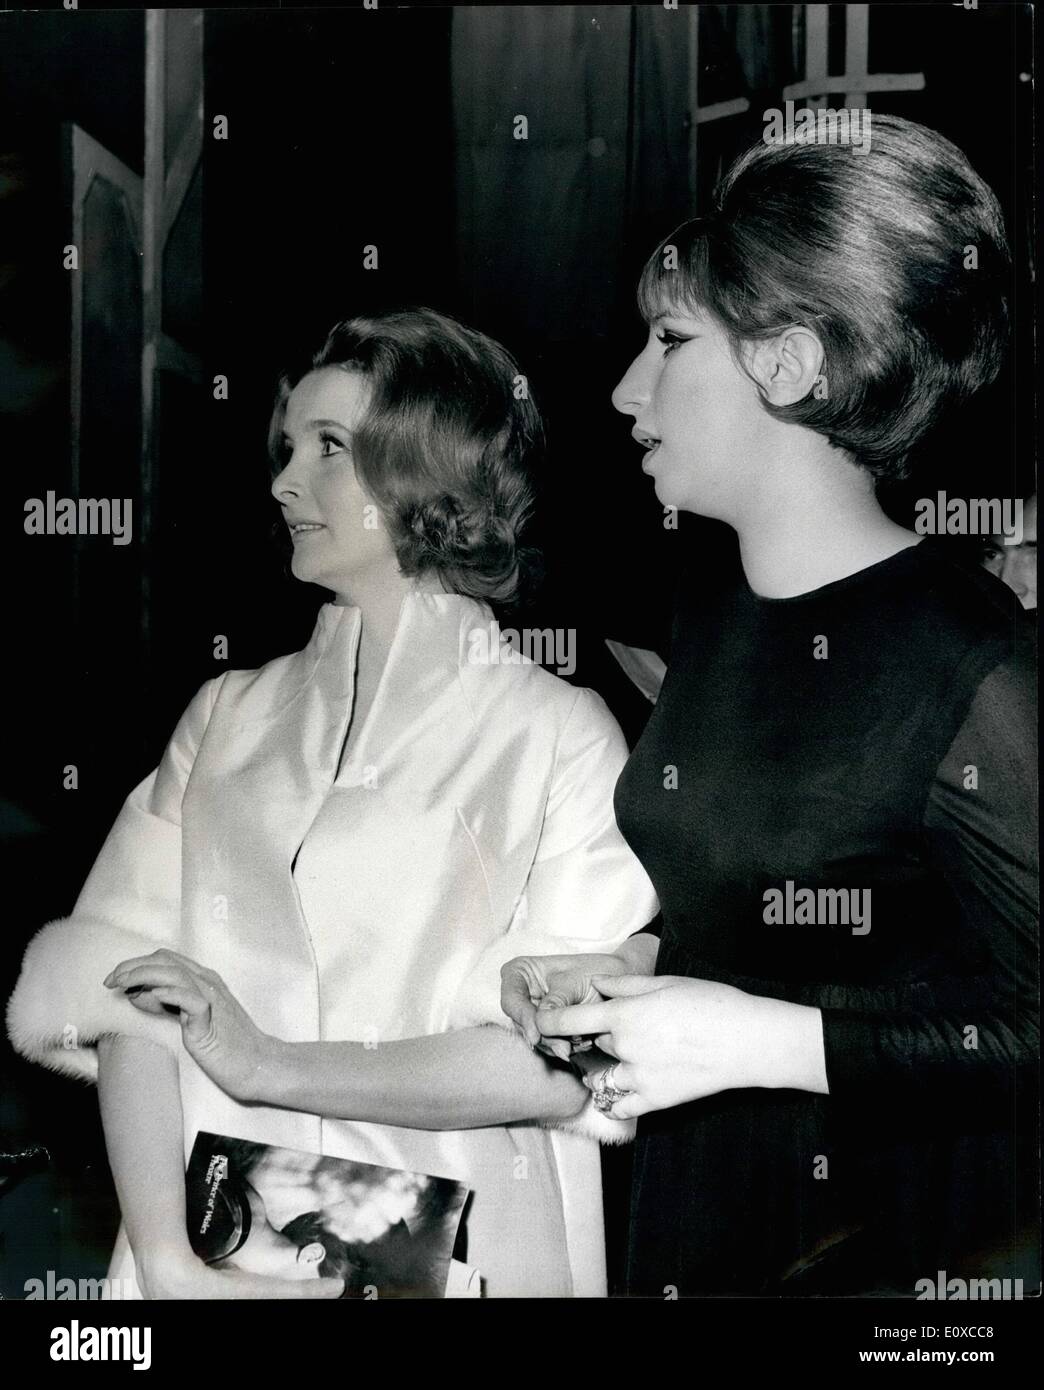 Apr. 04, 1966 - First night of ''Funny Girl'': photo shows Barbra Streisand, the star of ''Funny Girl''. which had its first night at the Prince of Wales Theater, London, last night - pictured, on right after the show with Millicent Martin (left), who congratulated Barbra on her performance. Stock Photo